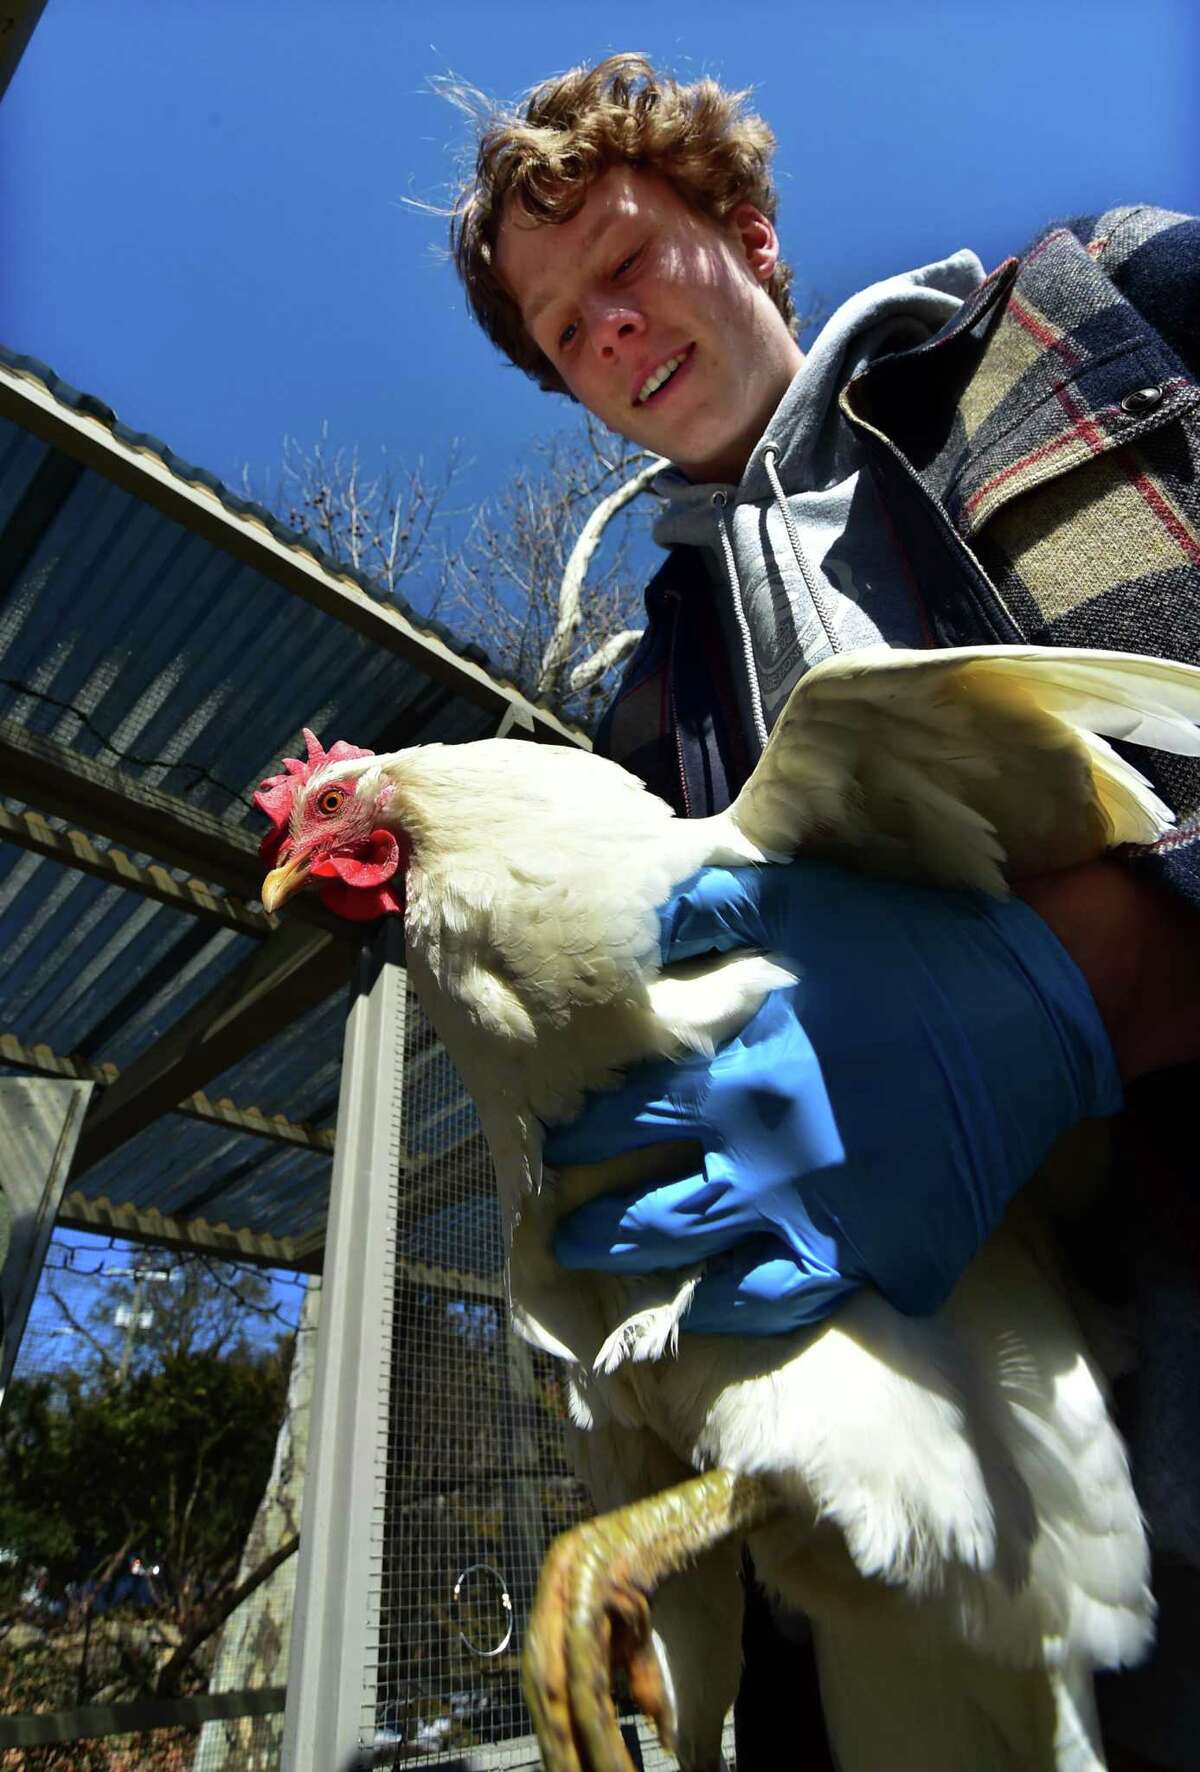 Brunswick student Magnus Reiley holds a chicken while his classmate Henry Sorbaro works to clean its chicken coop at a home in Greenwich, Conn., on Saturday February 26, 2022. Sorbaro, who learned the ropes by caring for his own chickens, started the business with Reiley and another classmate. They all work together on the weekends to care for around ten coops in Greenwich and New Canaan.